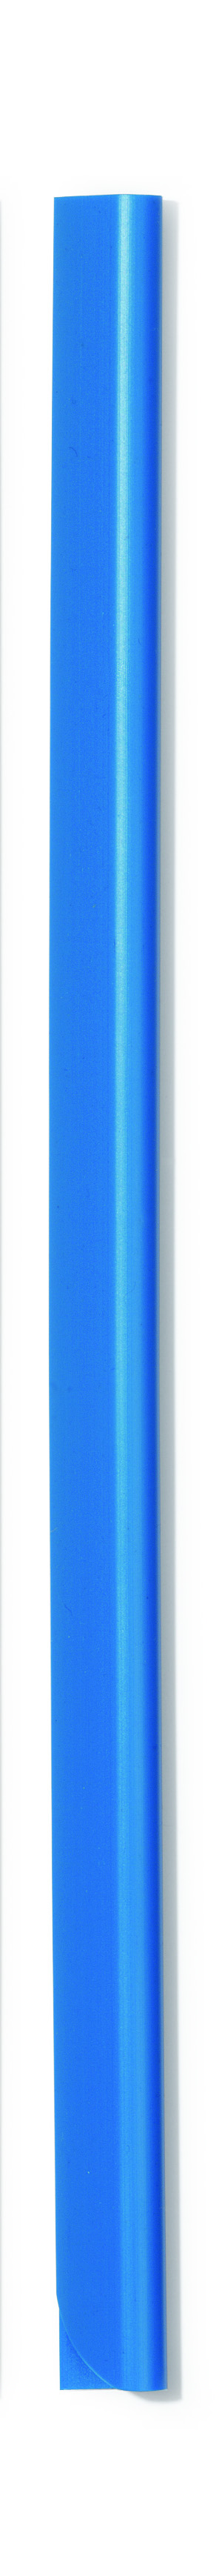 Durable Spine Bar A4 6mm Blue (Pack 100)